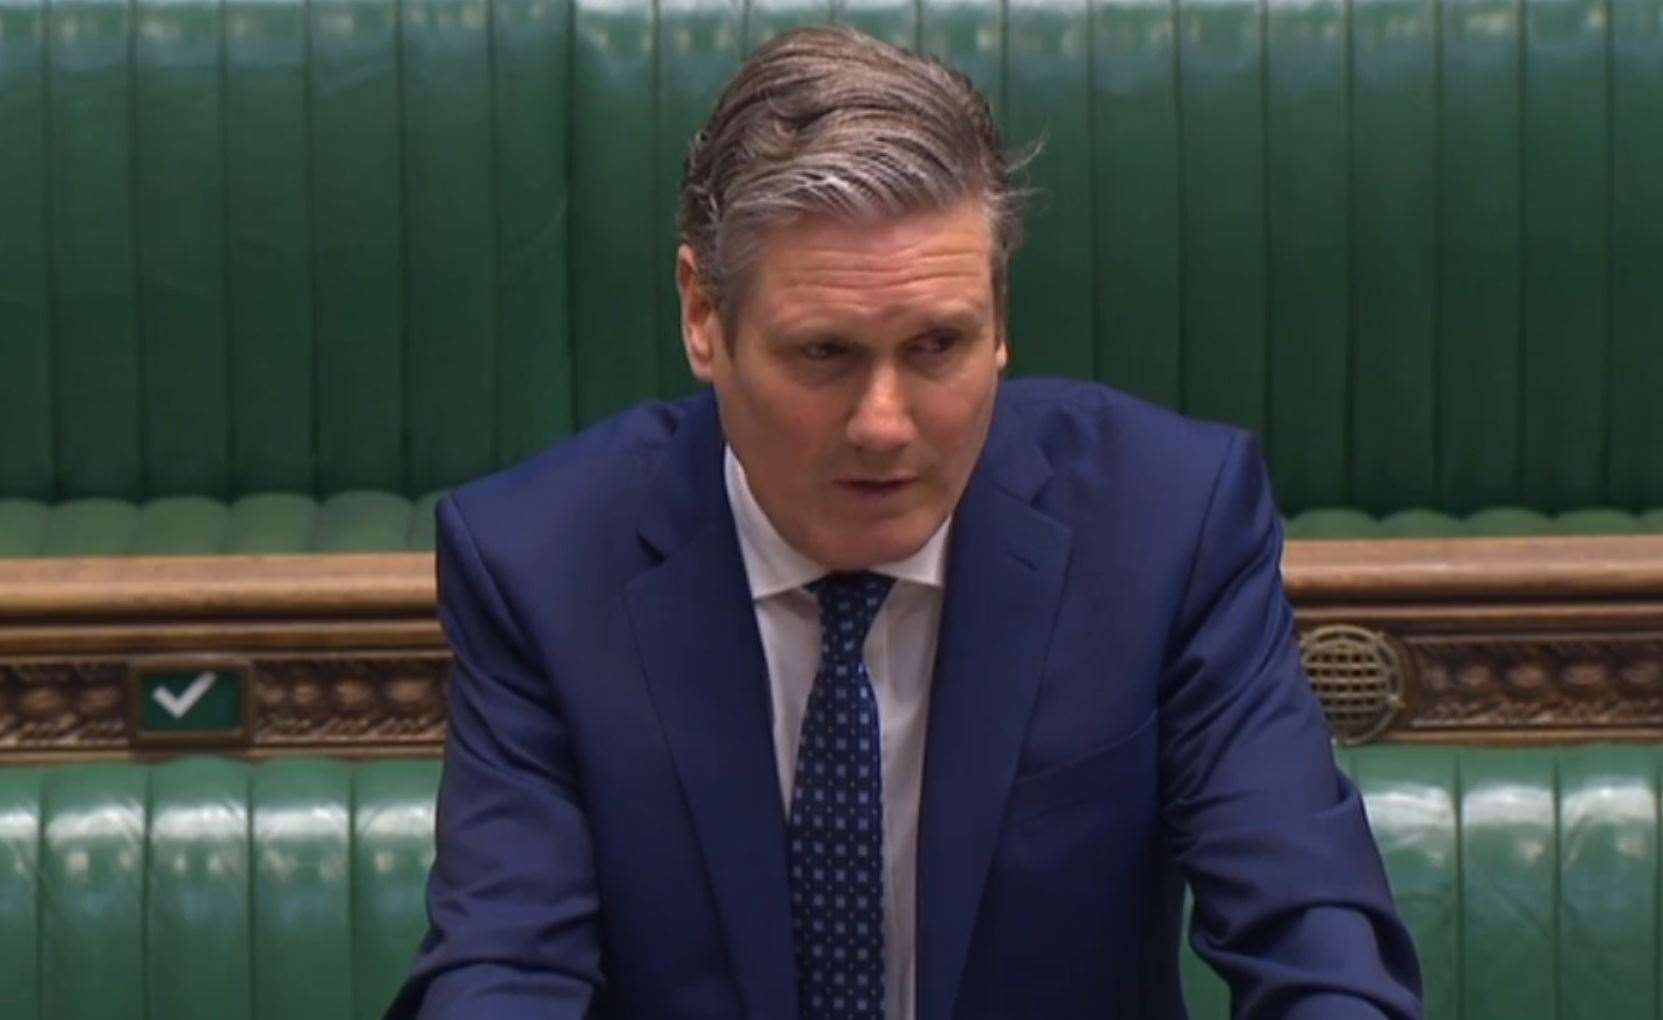 Labour leader Sir Keir Starmer speaking during Prime Minister’s Questions (House of Commons/PA)